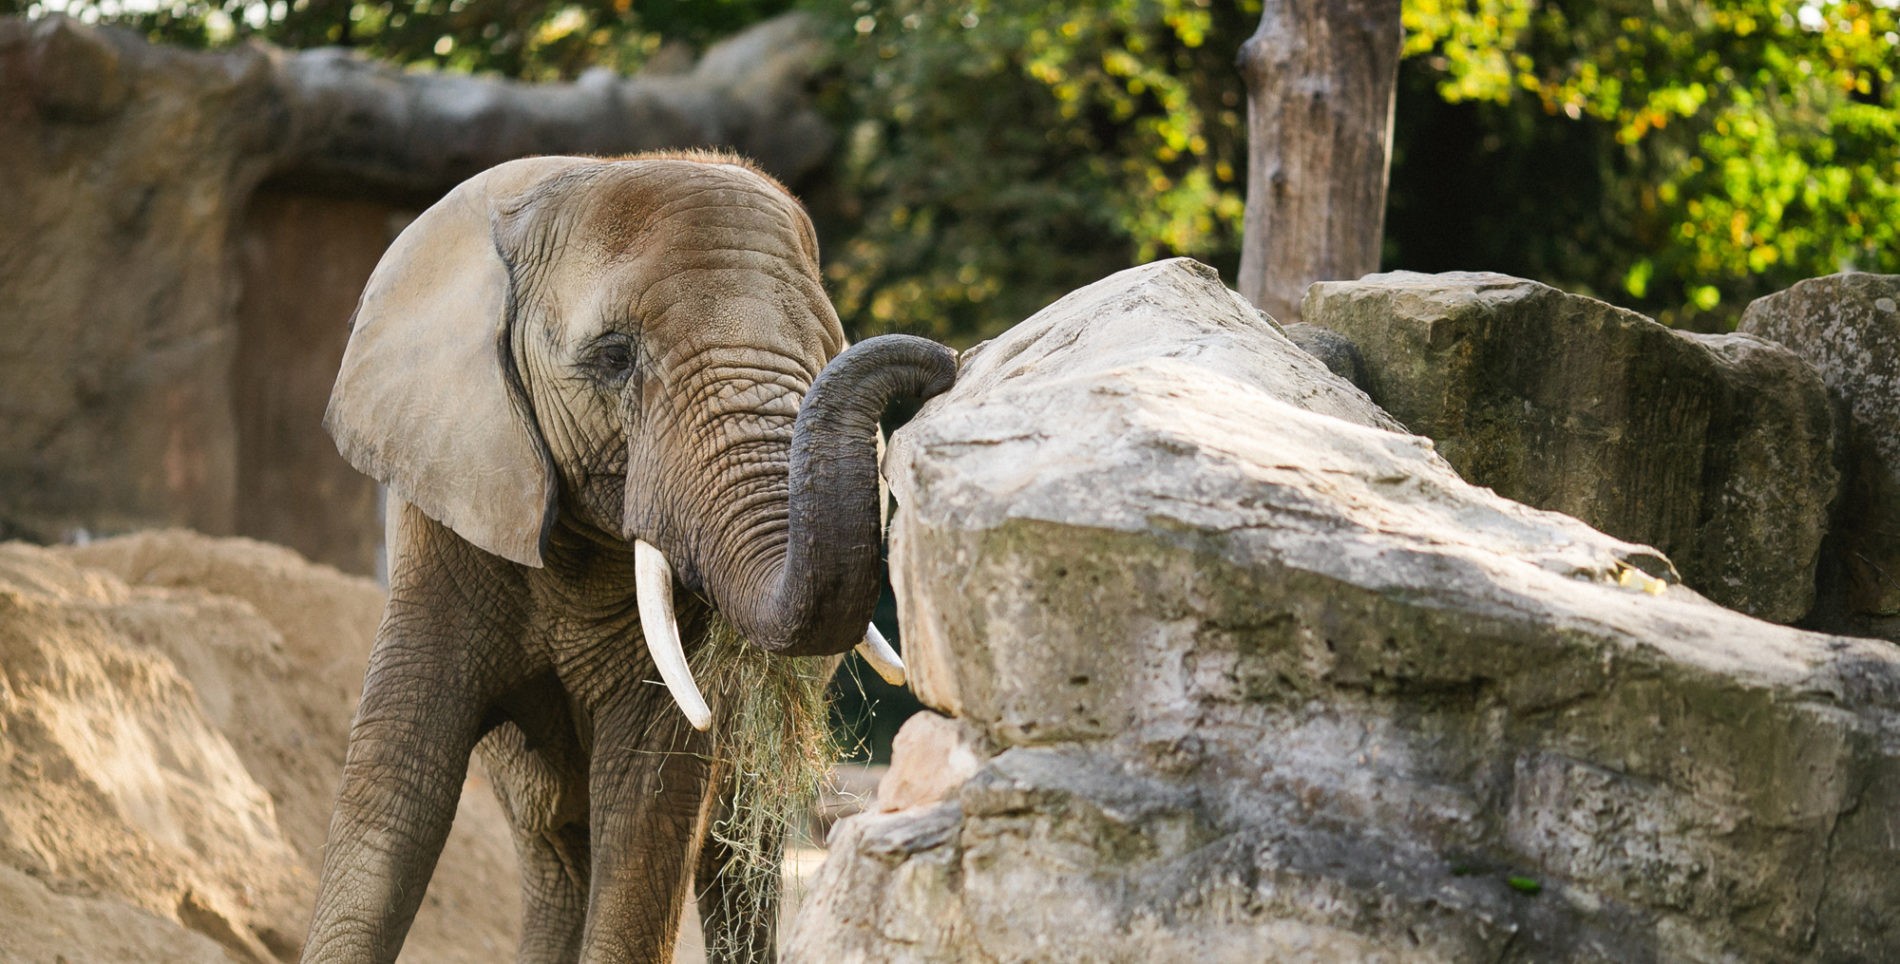 Elephant in the outdoor enclosure